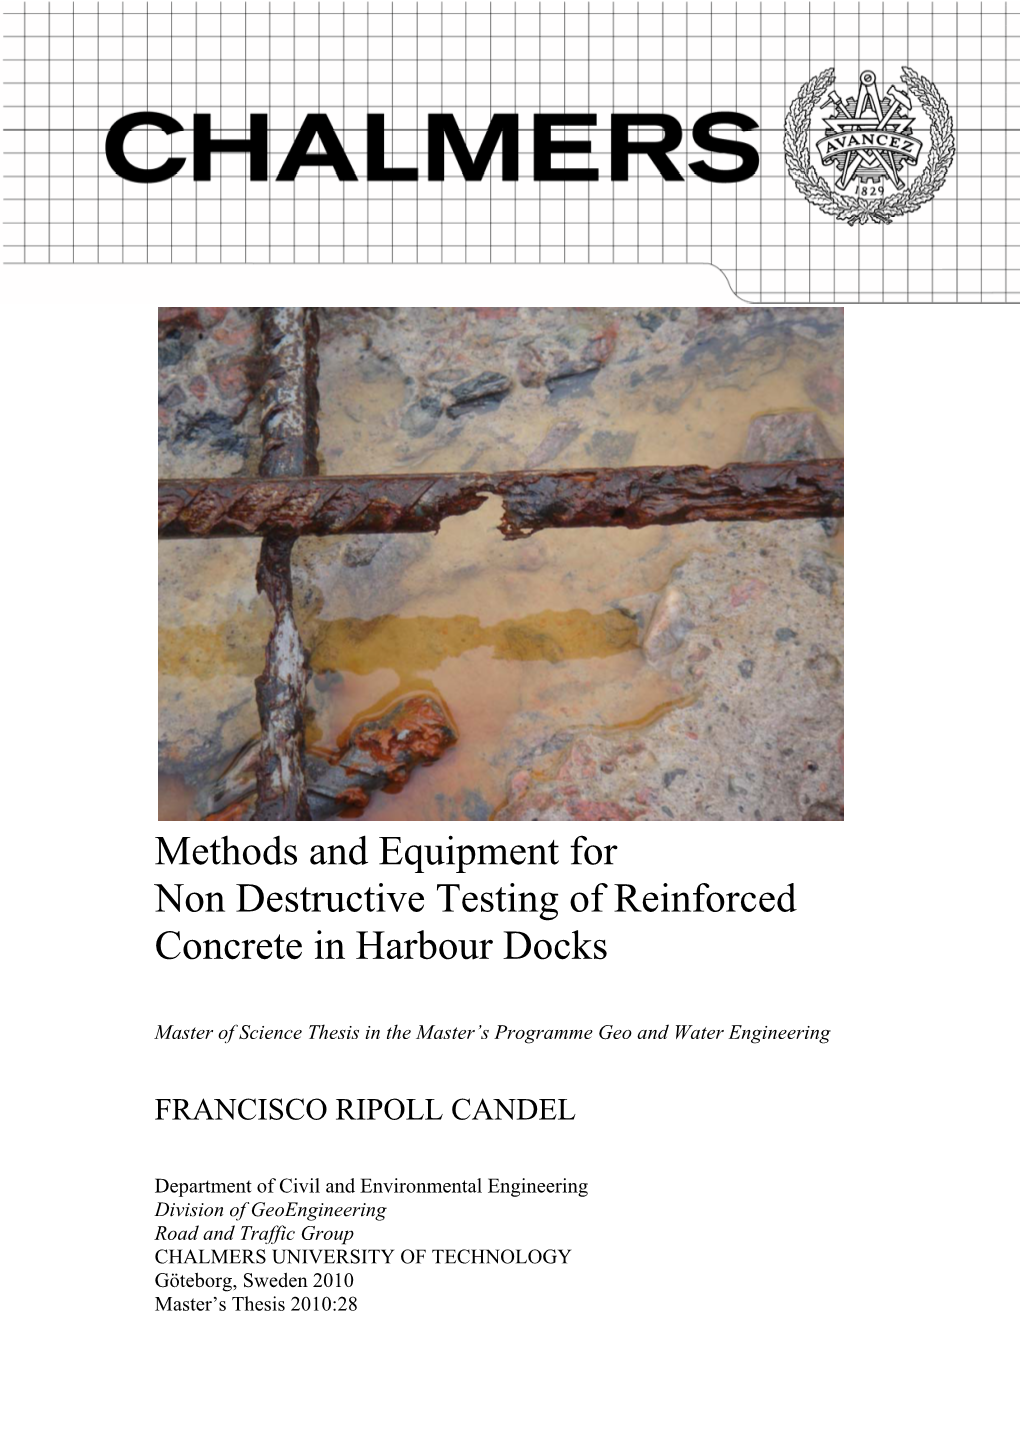 Methods and Equipment for Non Destructive Testing of Reinforced Concrete in Harbour Docks